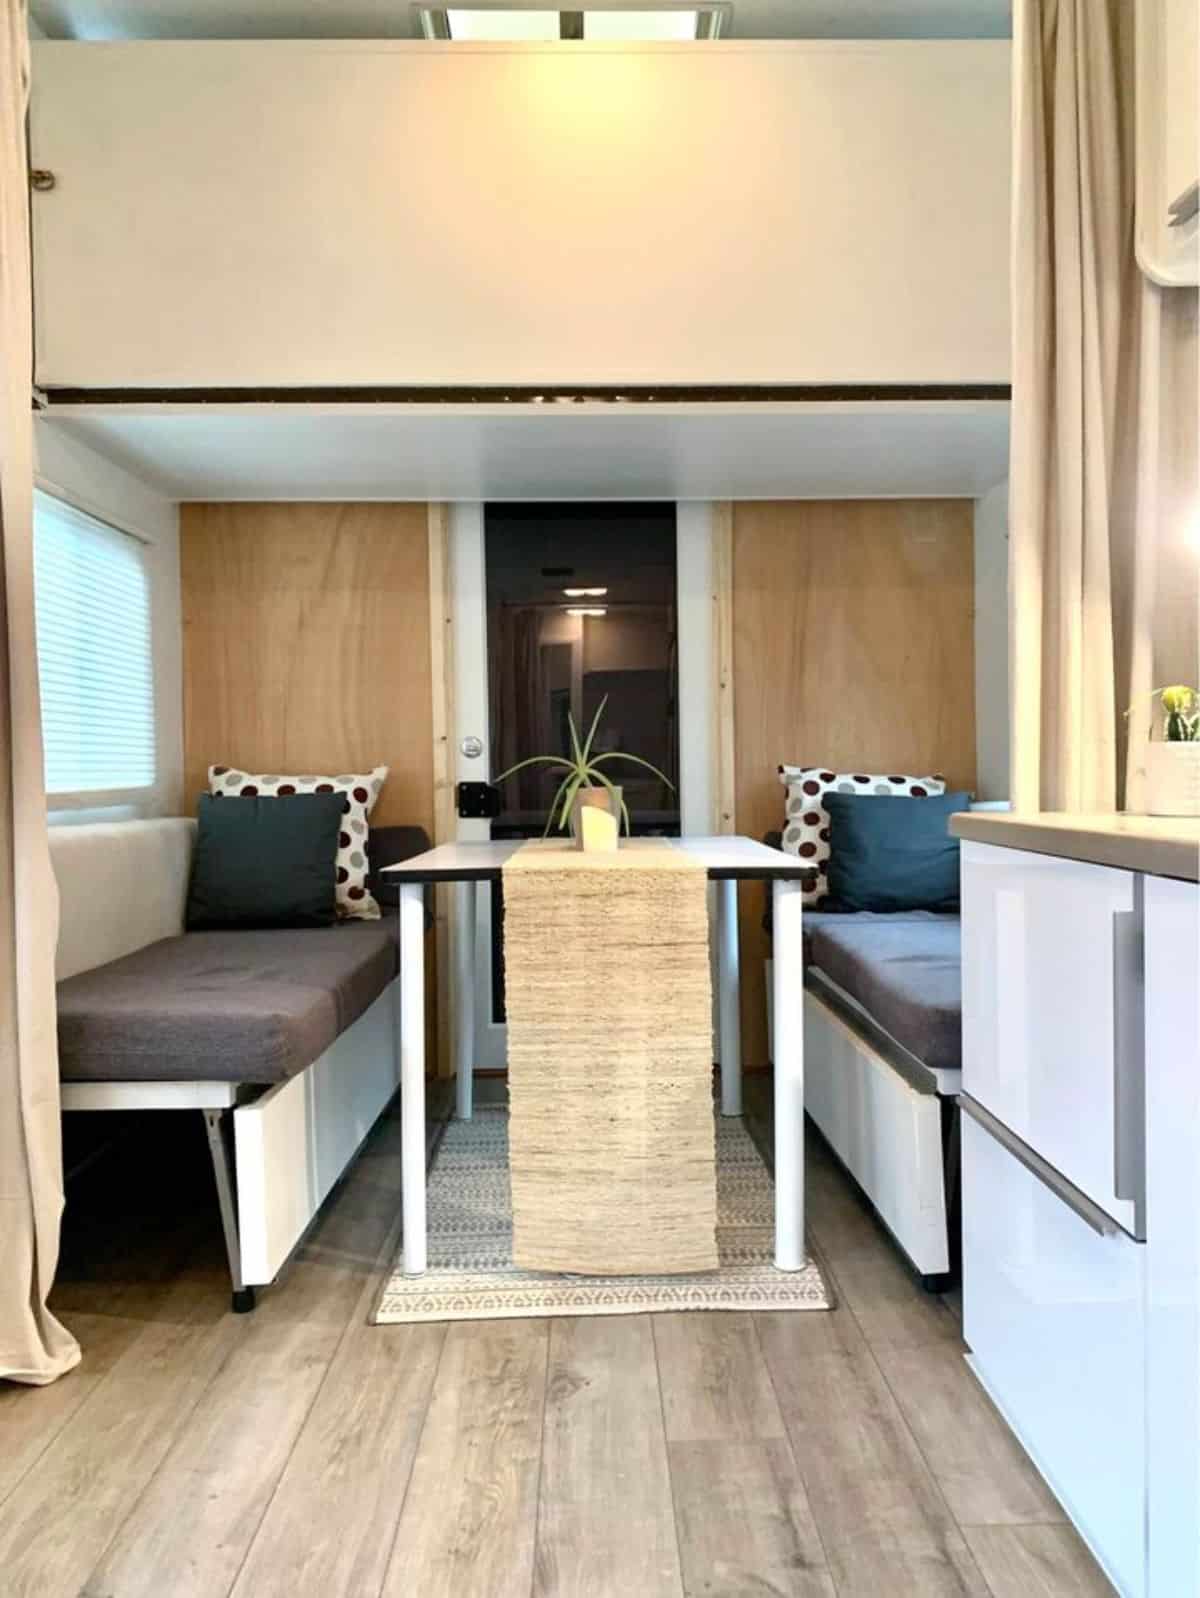 Living area of 20' Compact Tiny House